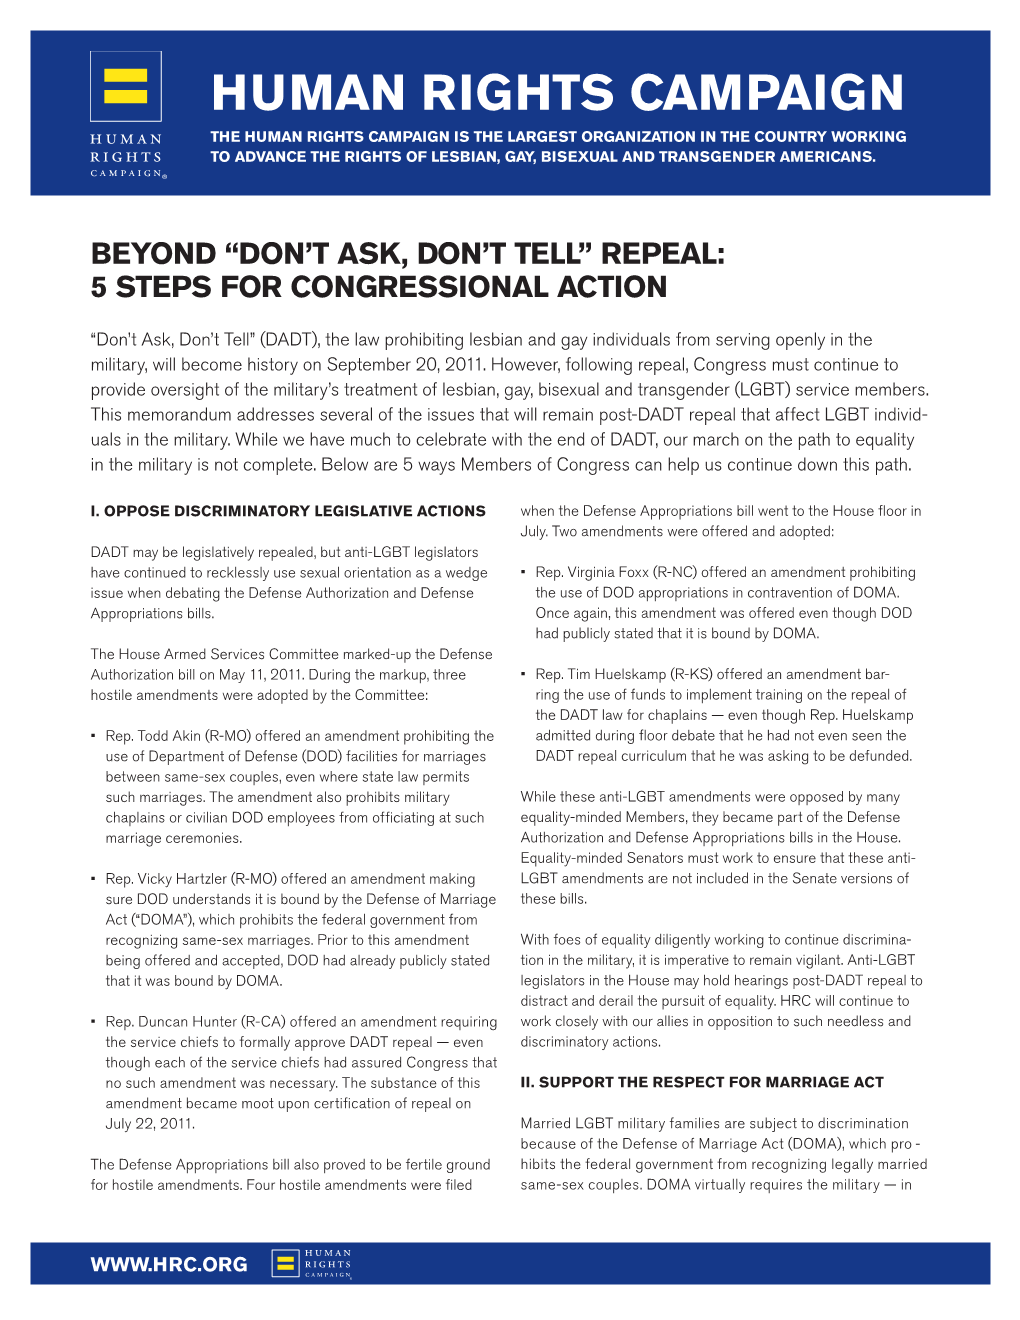 Repeal: 5 Steps for Congressional Action